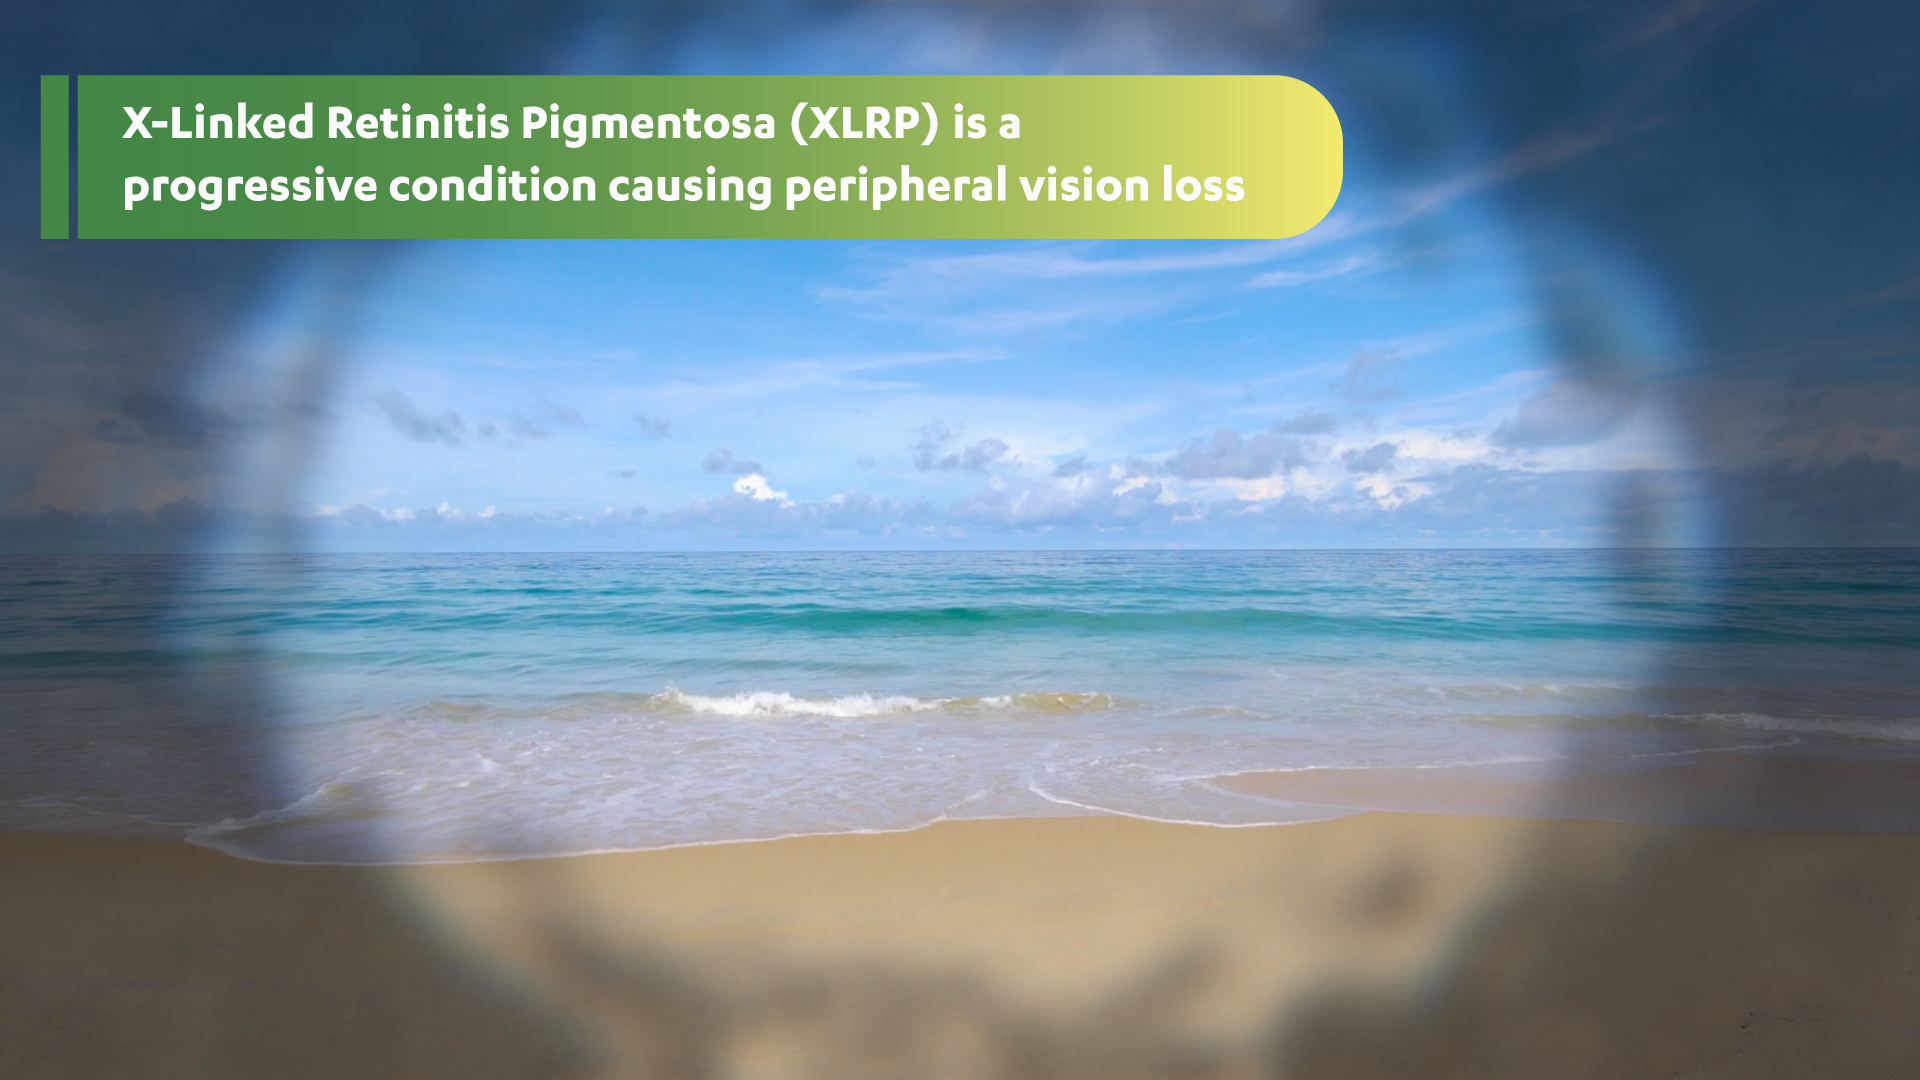 XLRP is a progressive condition causing peripheral vision loss